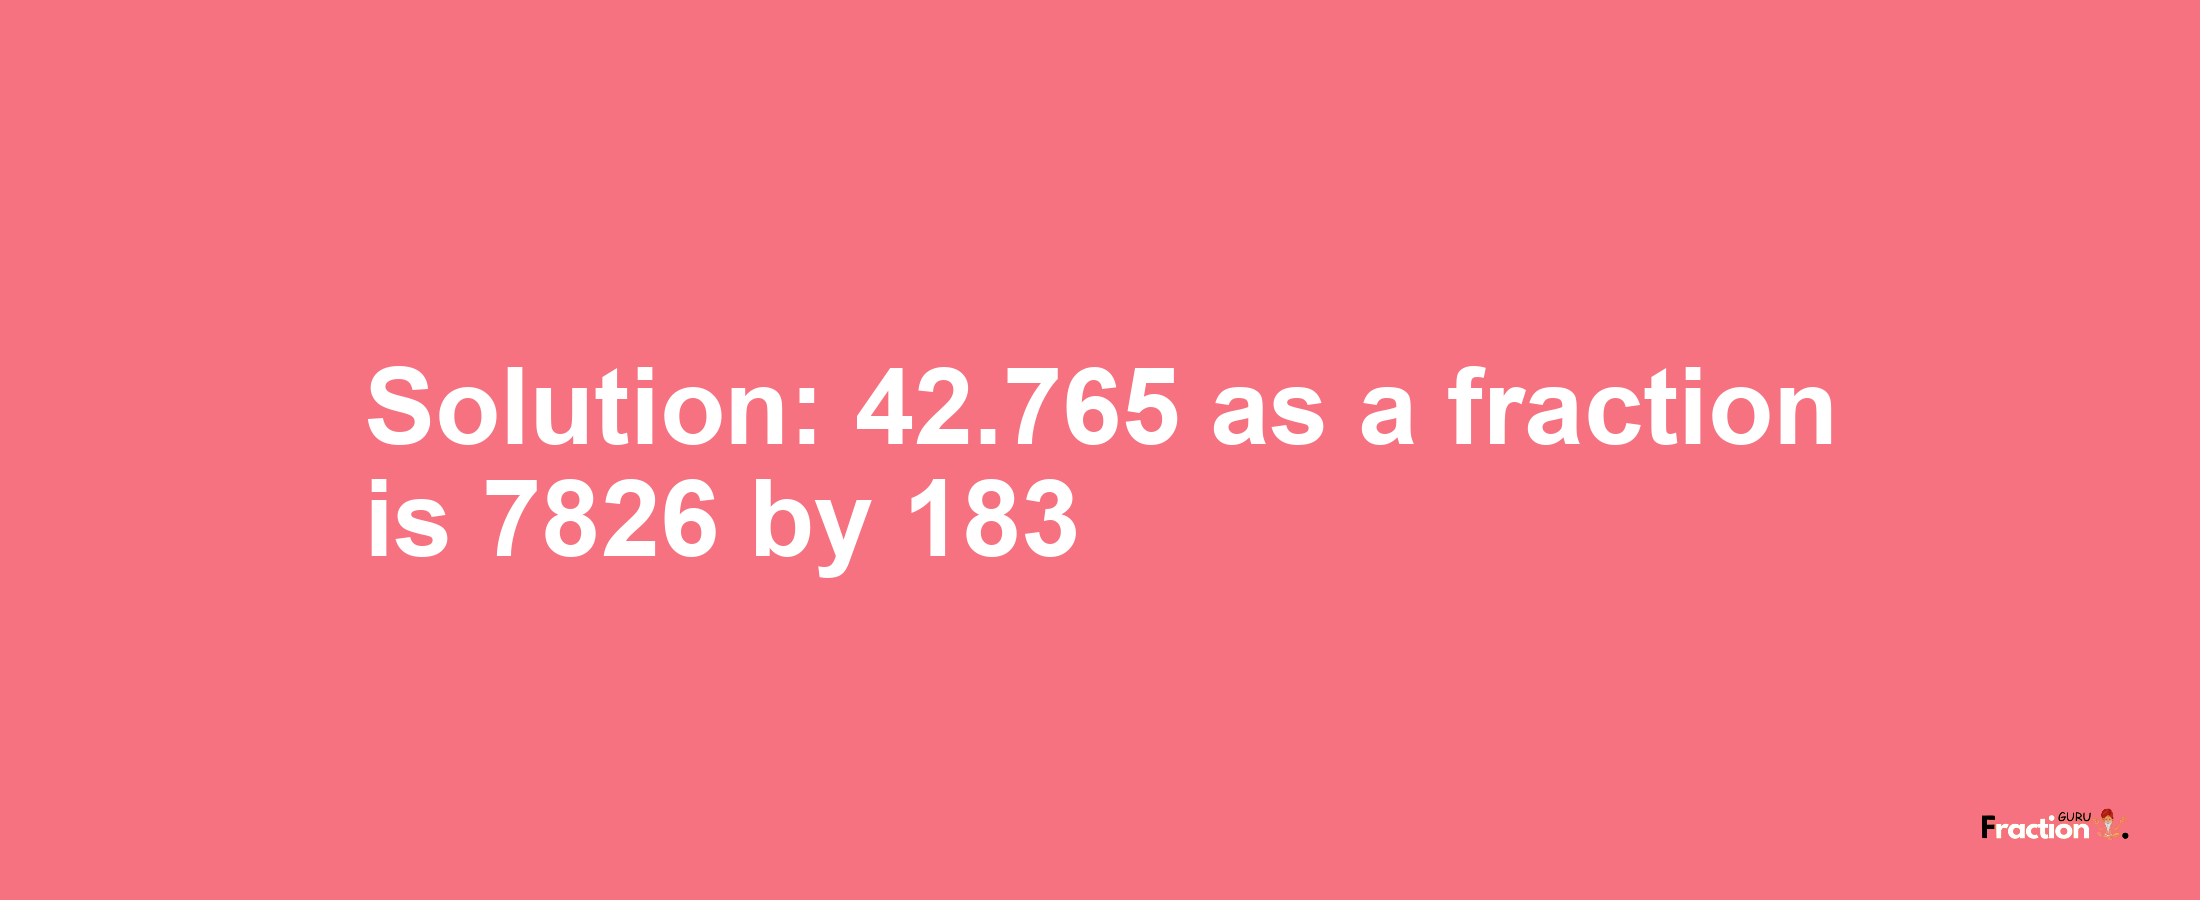 Solution:42.765 as a fraction is 7826/183